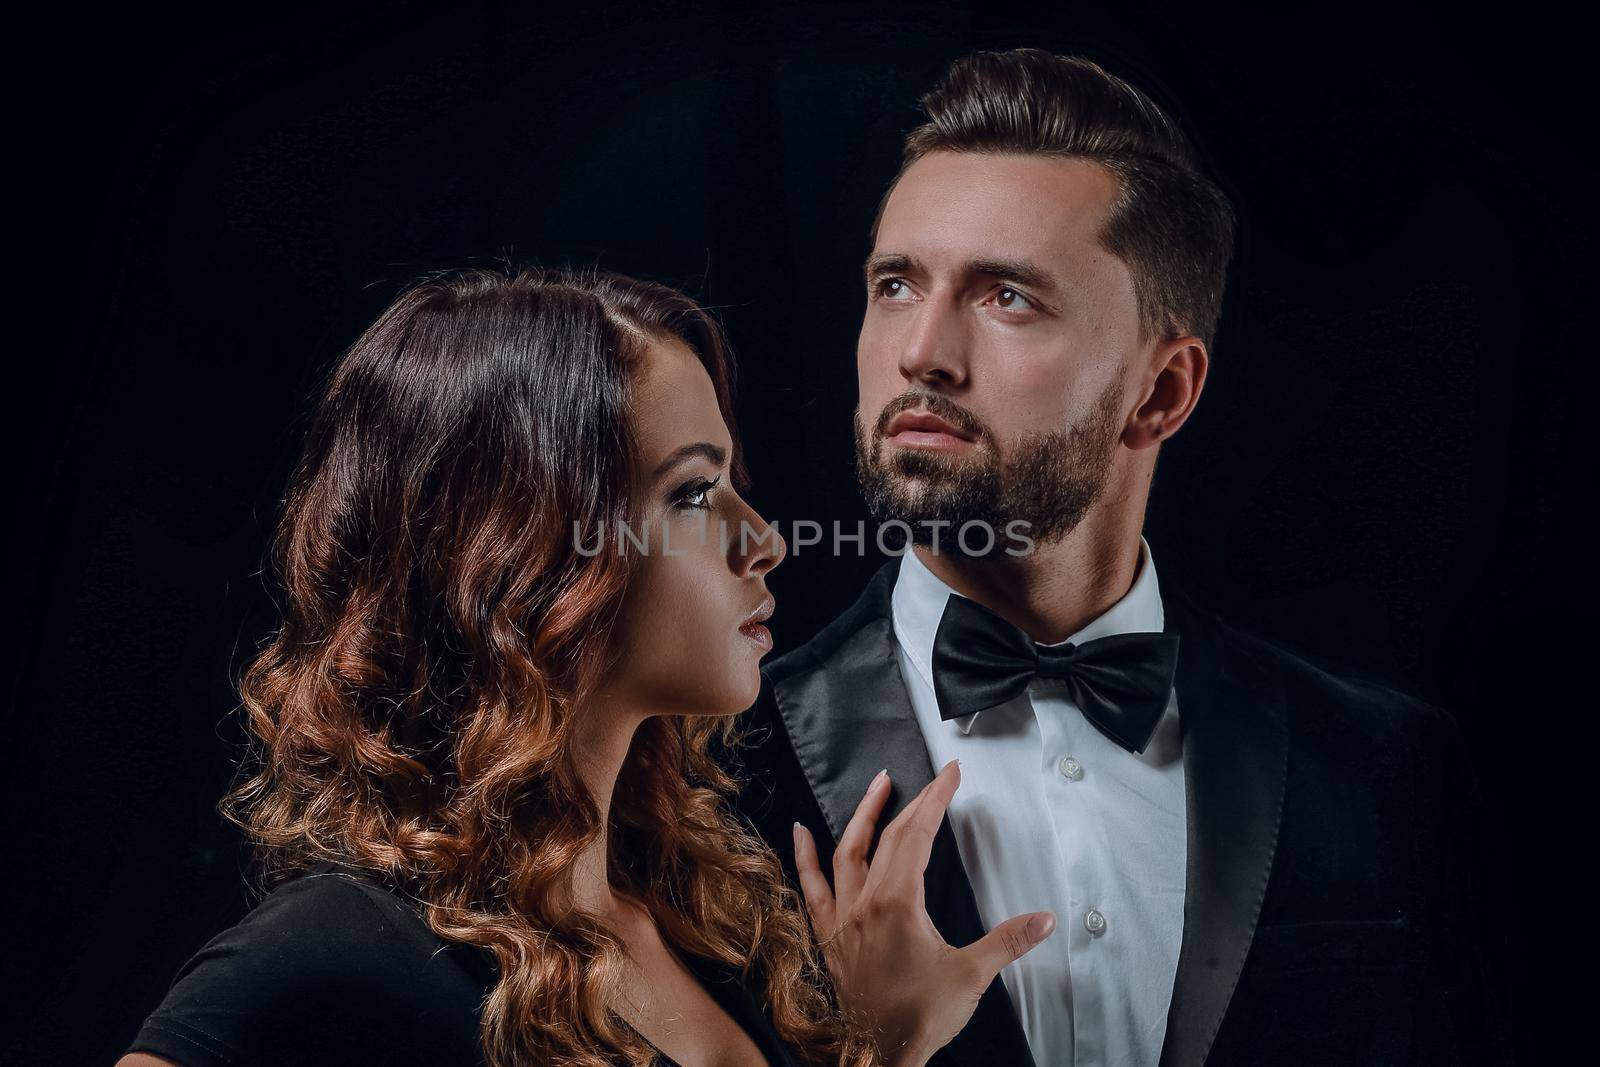 Portrait of a beautiful young couple in love posing at studio over dark background.